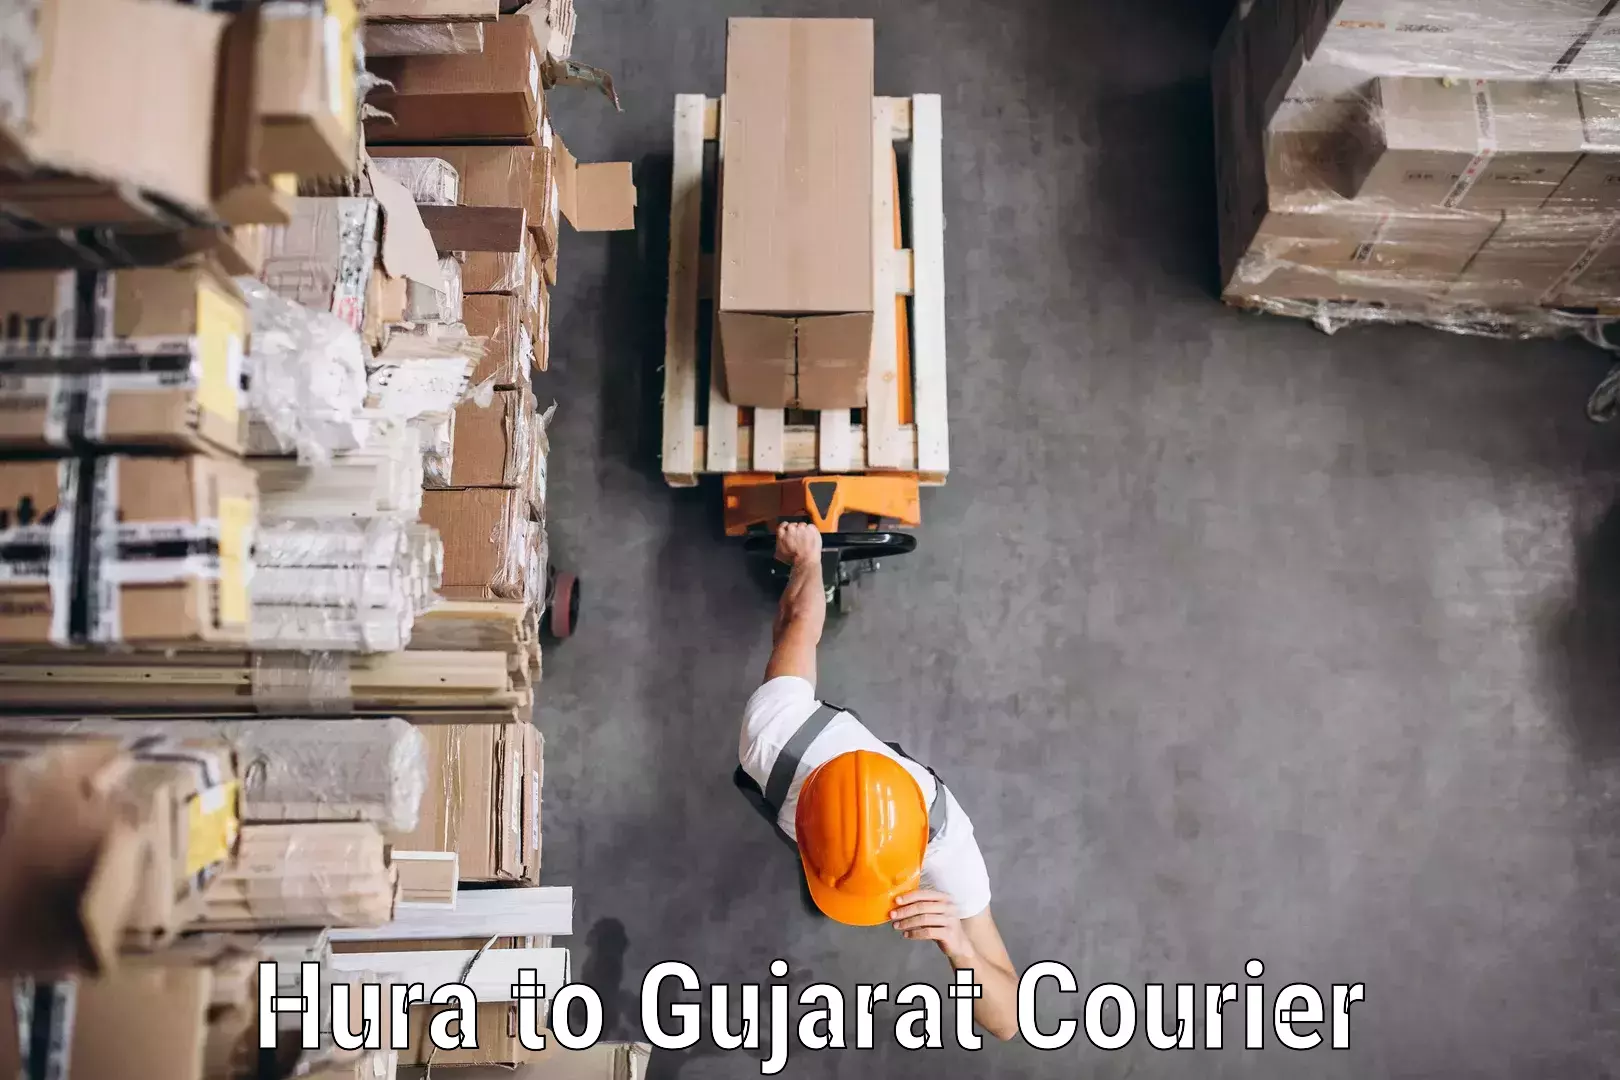 Nationwide delivery network Hura to Gujarat